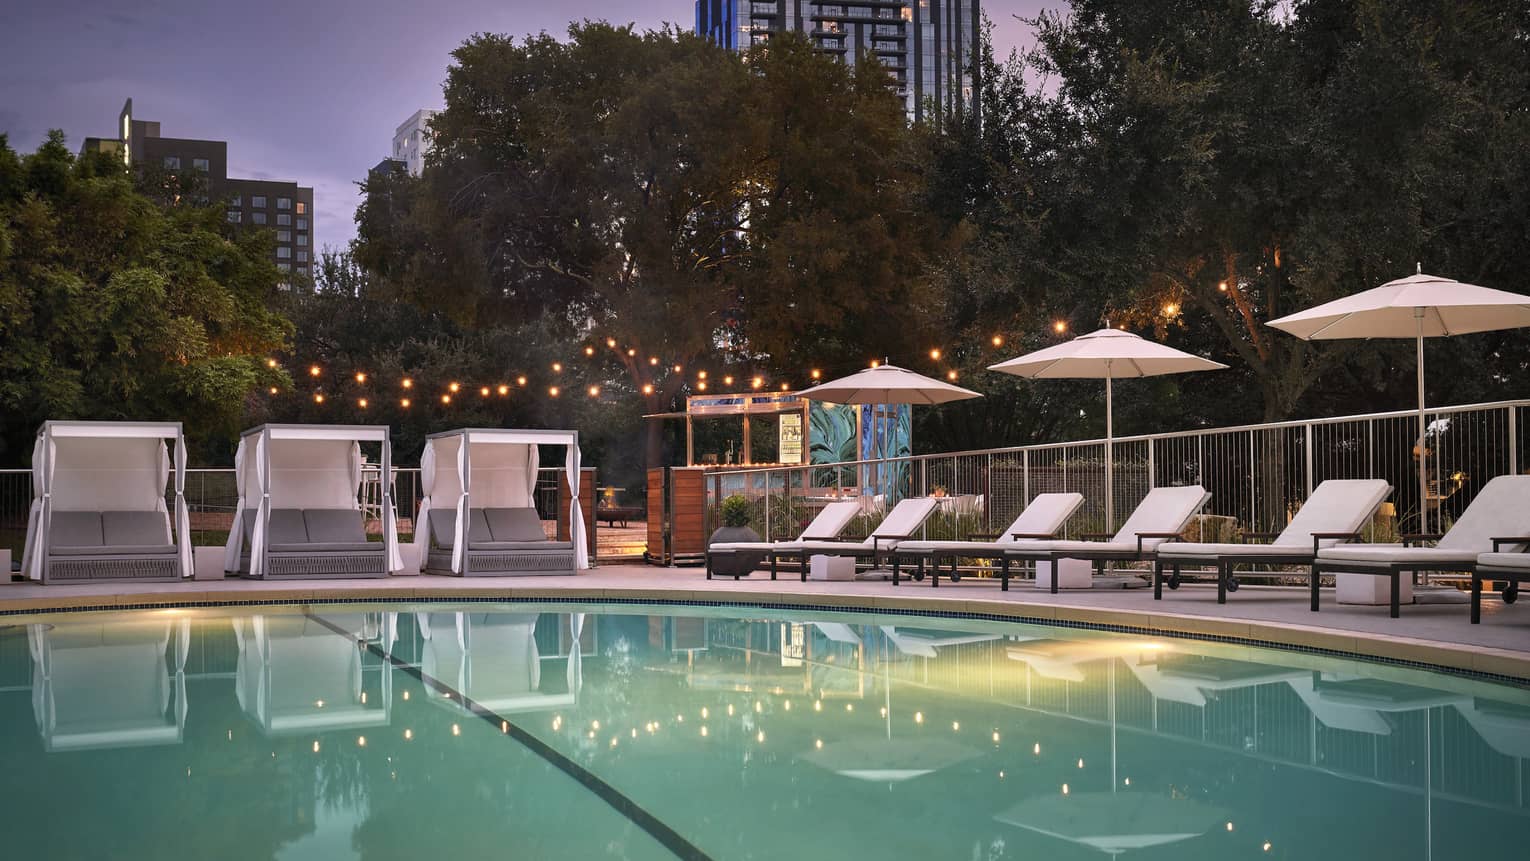 An outdoor pool at evening surrounded by lounge chairs, umbrellas and large trees.